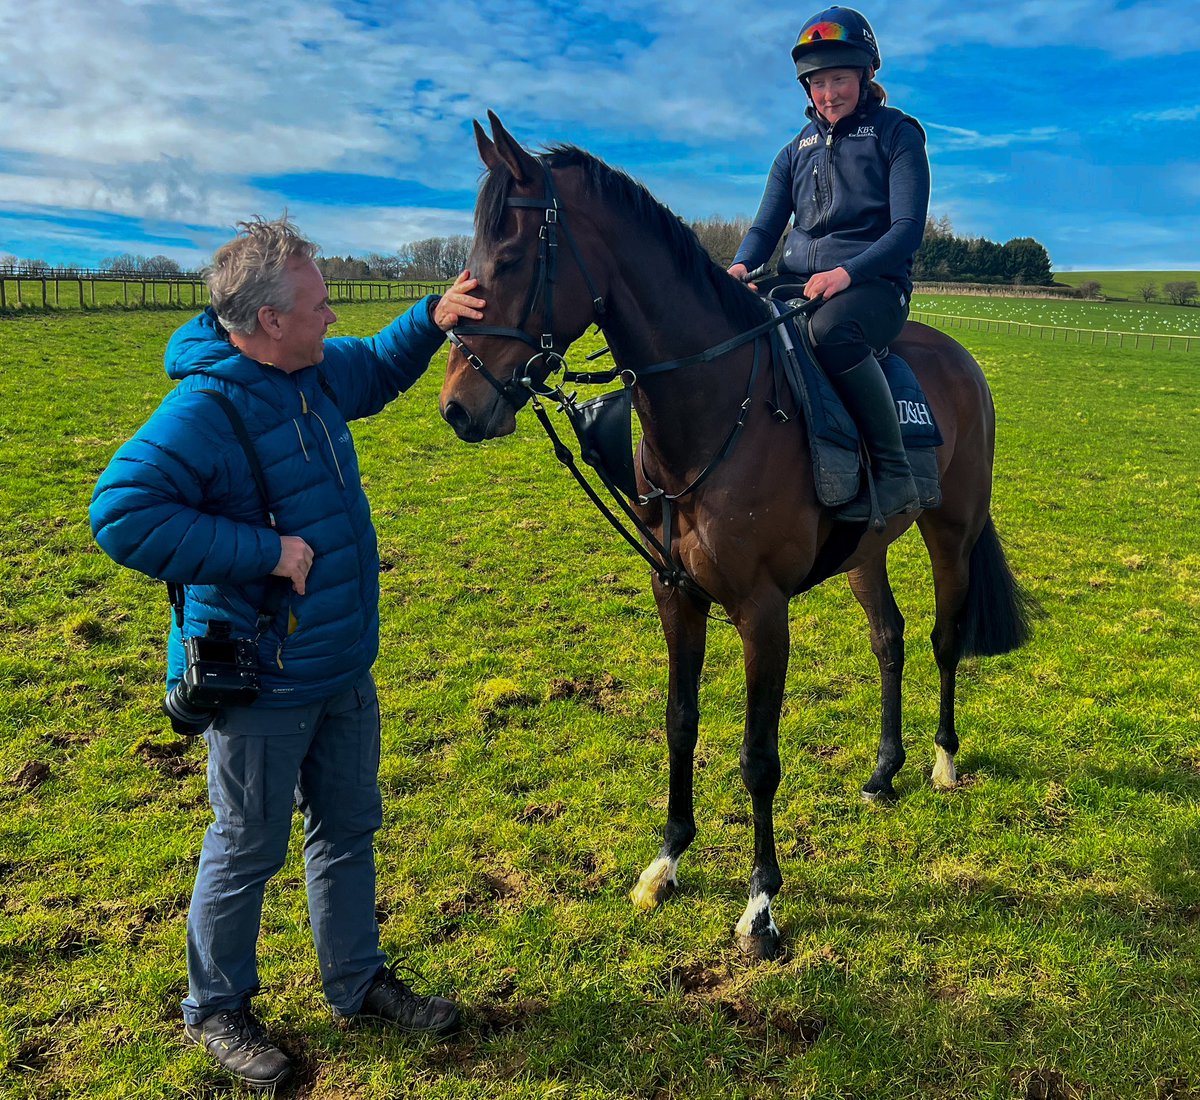 Capturing @edward_whitaker on the other side of the camera with @CheltenhamRaces winner Chianti Classico. #teamthorndale #racehorse #fedtowin on @DodsonHorrell